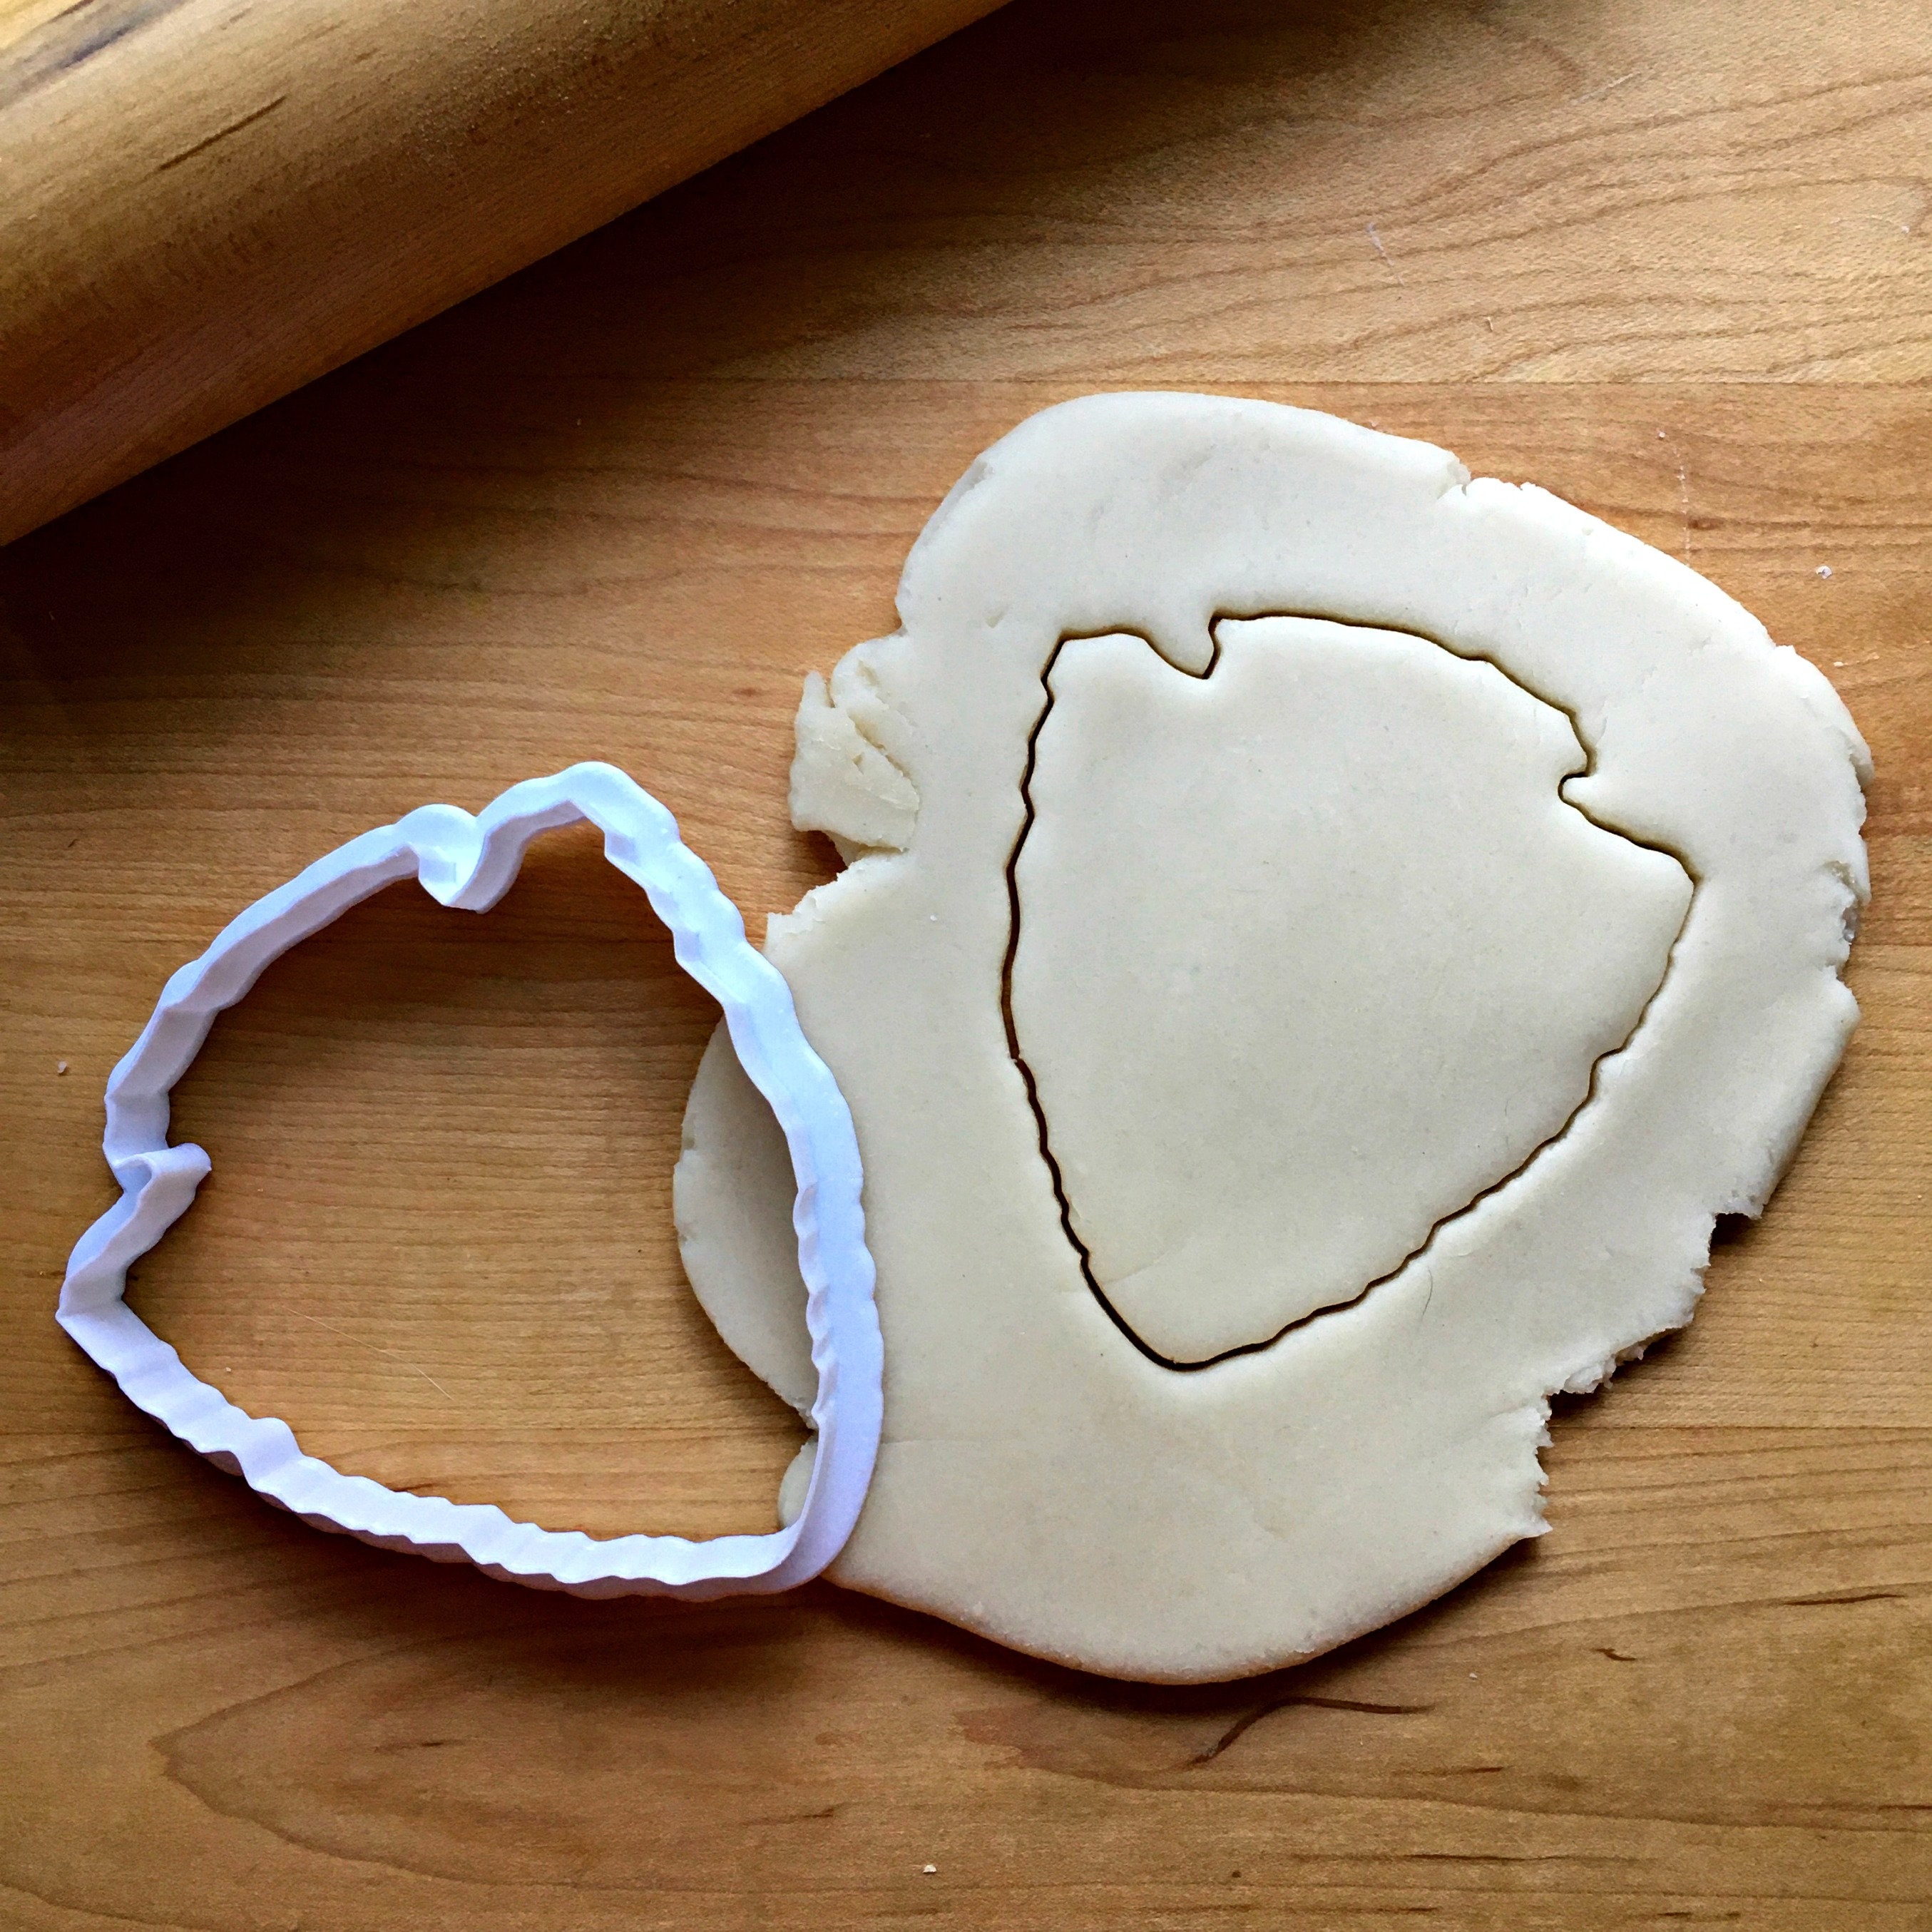 Arrowhead Cookie Cutter/Multi-Size/Dishwasher Safe Available Etsy 日本